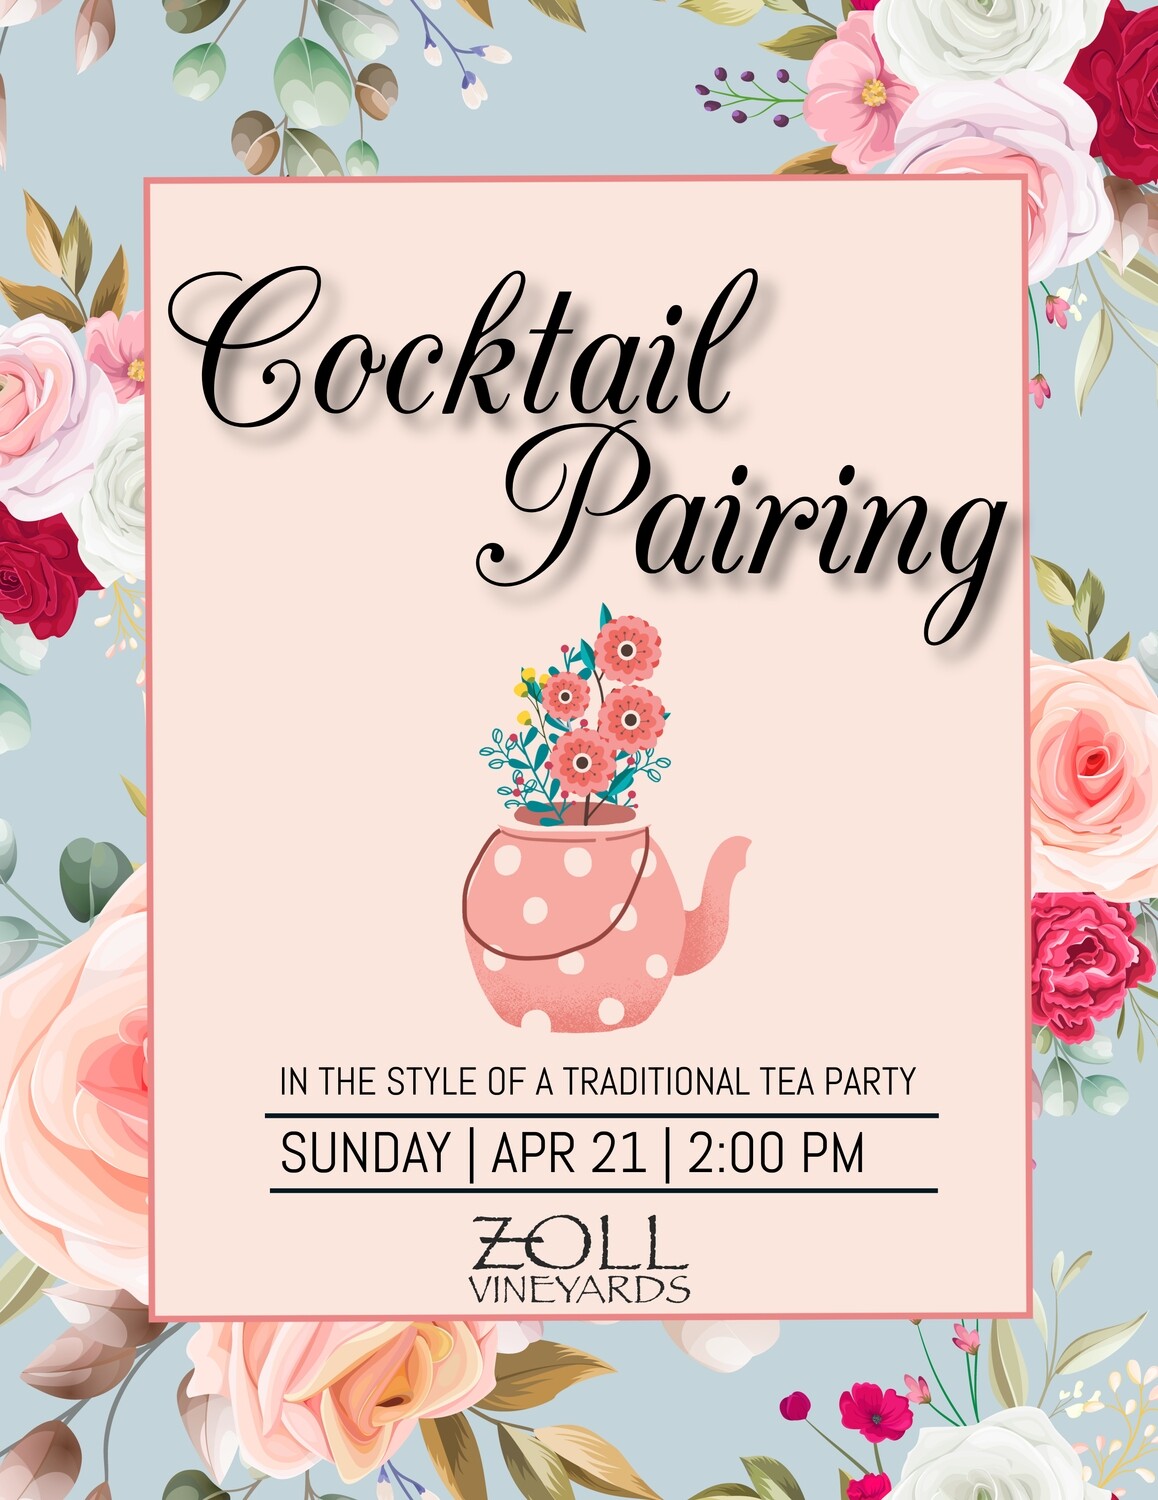 Spring Tea Party Cocktail Pairing